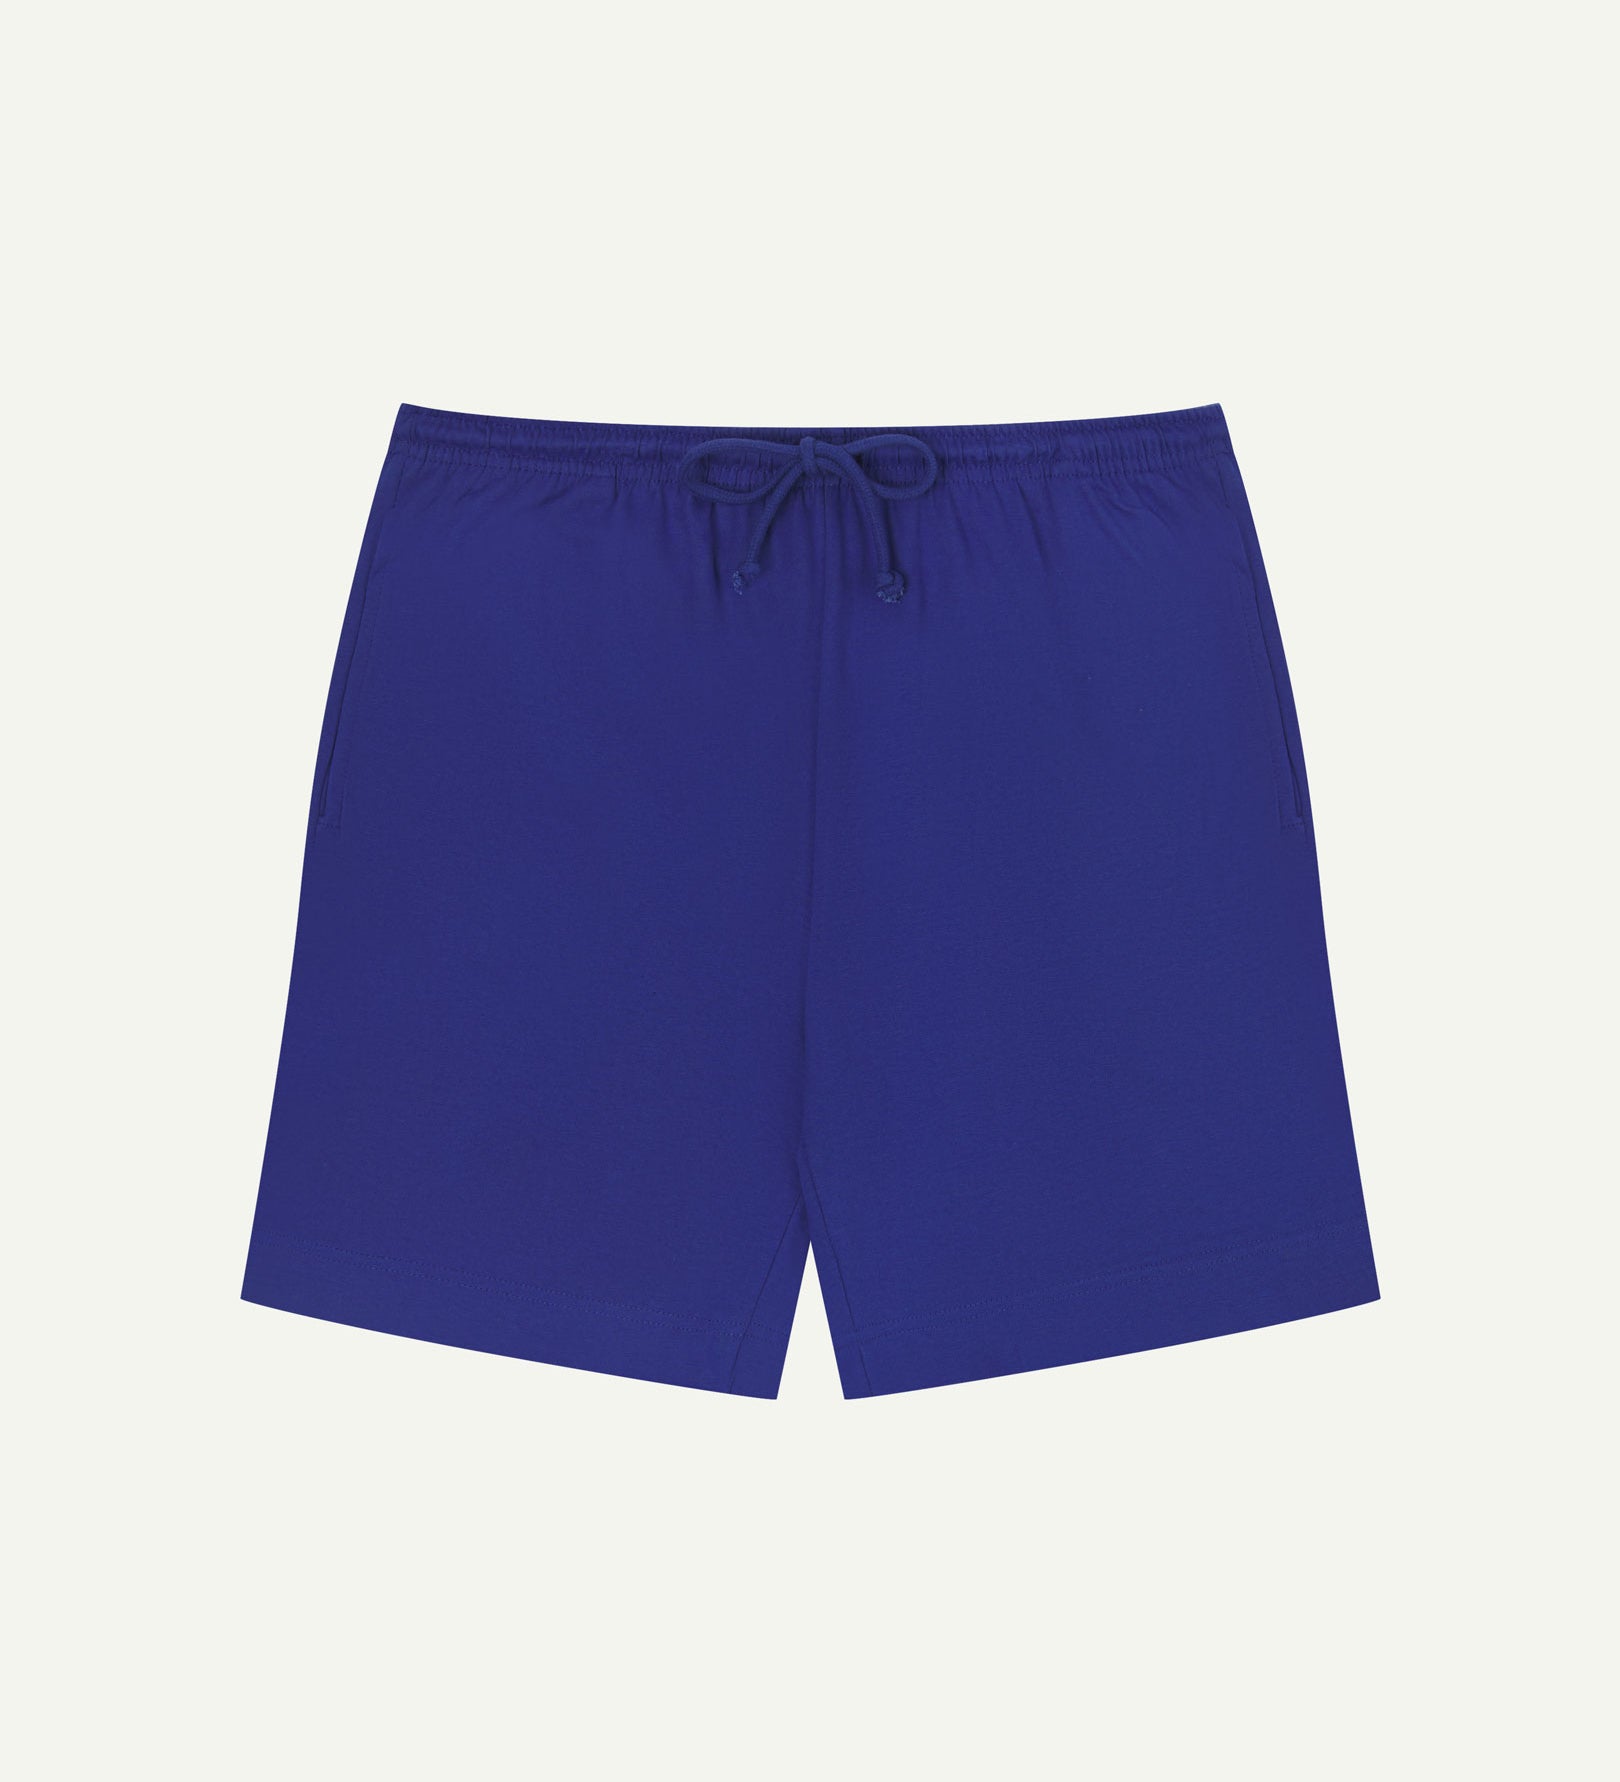 Front view of ultra blue organic cotton 7007 men's shorts by Uskees against white background. Clear view of drawstring waist.